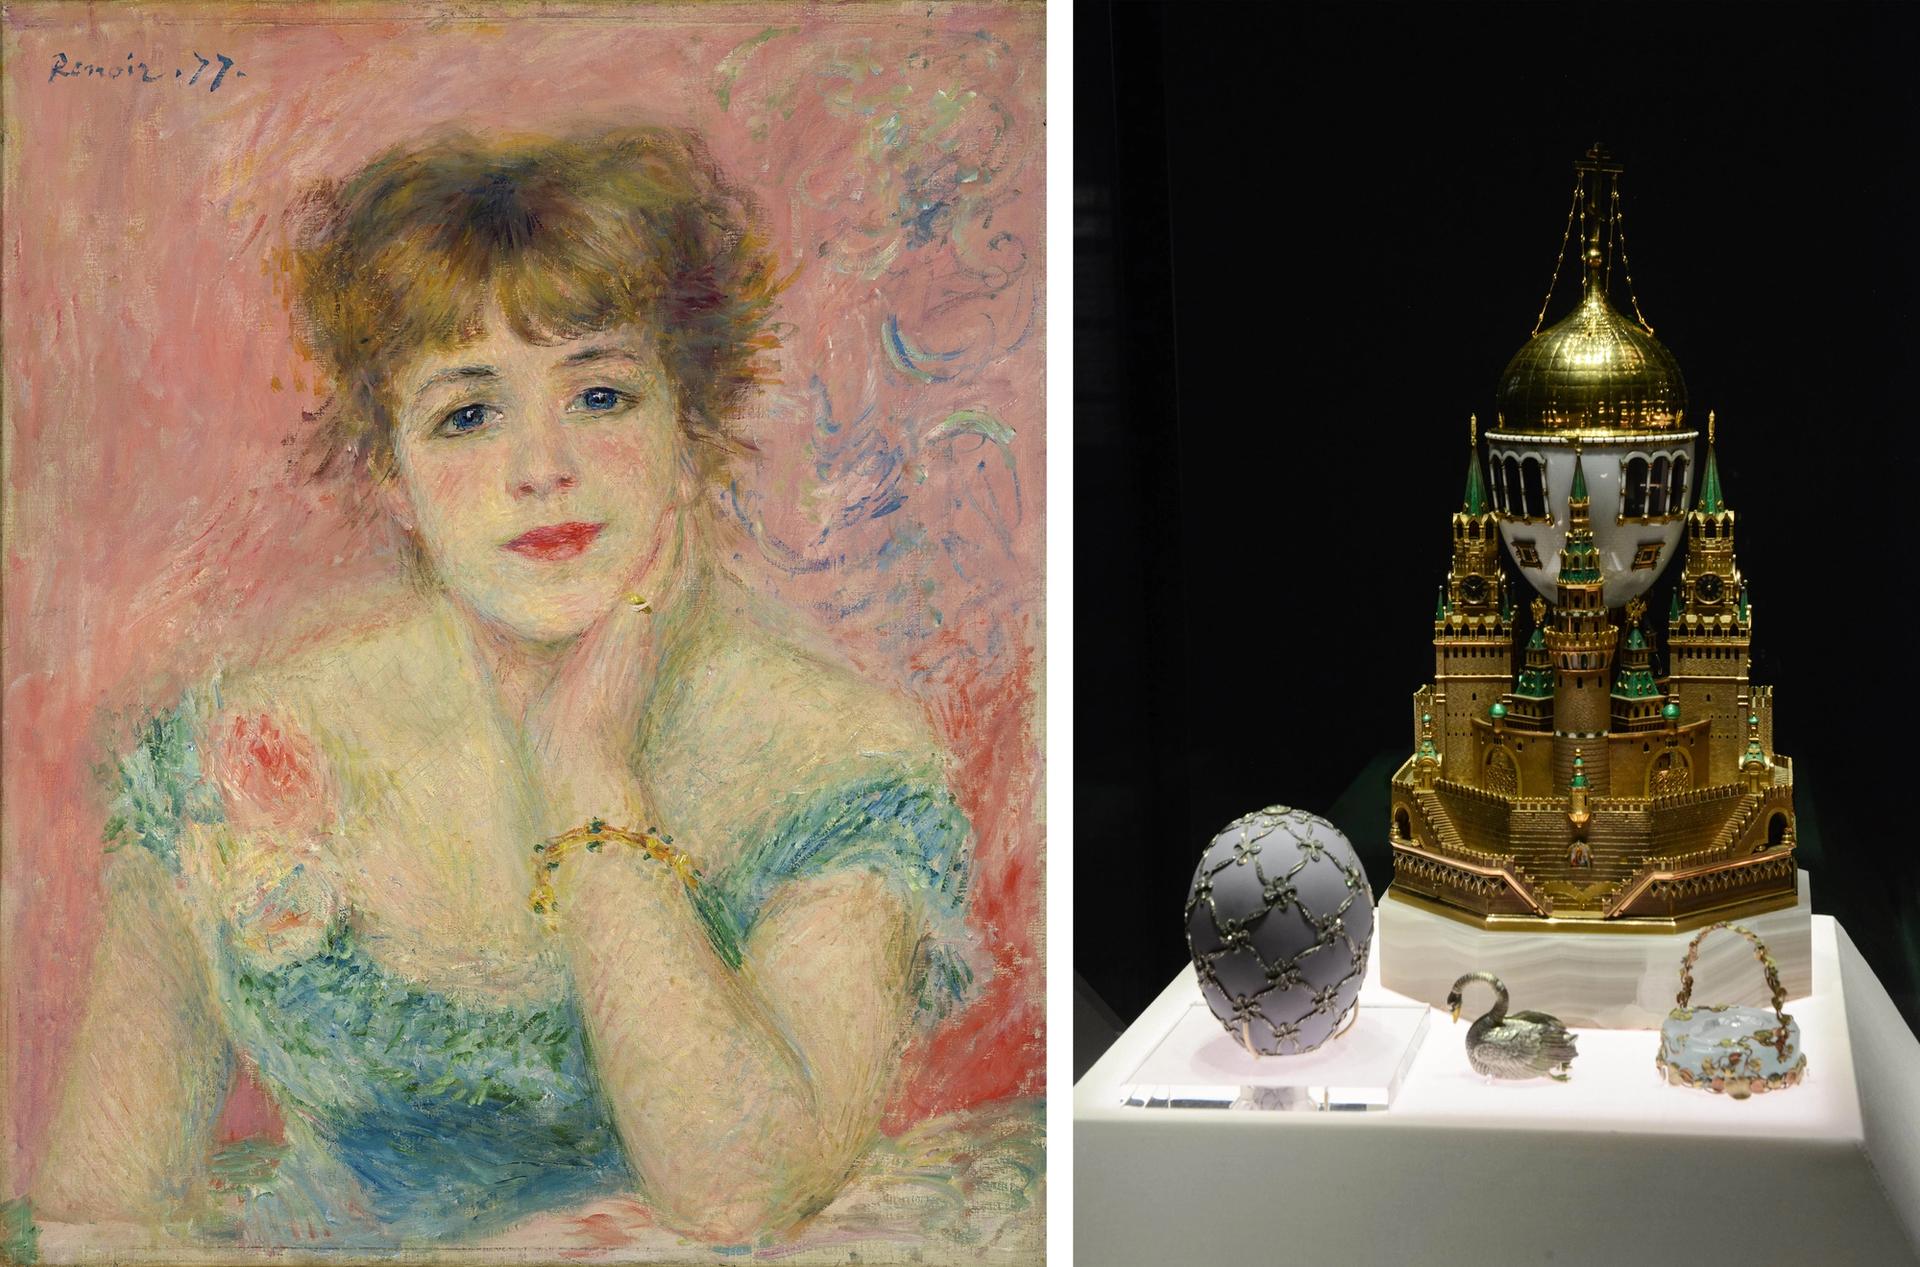 A number of Russian treasures are currently held in exhibitions abroad, including Portrait of Jeanne Samary (La Reverie) (1877) by Pierre-Auguste Renoir (left), which is in a show at Fondation Louis Vuitton in Paris, and the Moscow Kremlin Egg (1906) and other items by Fabergé (right), which is on view at the Victoria and Albert Museum in London Renoir: Pushkin Museum of Fine Arts; Fabergé: V&A © The Moscow Kremlin Museums